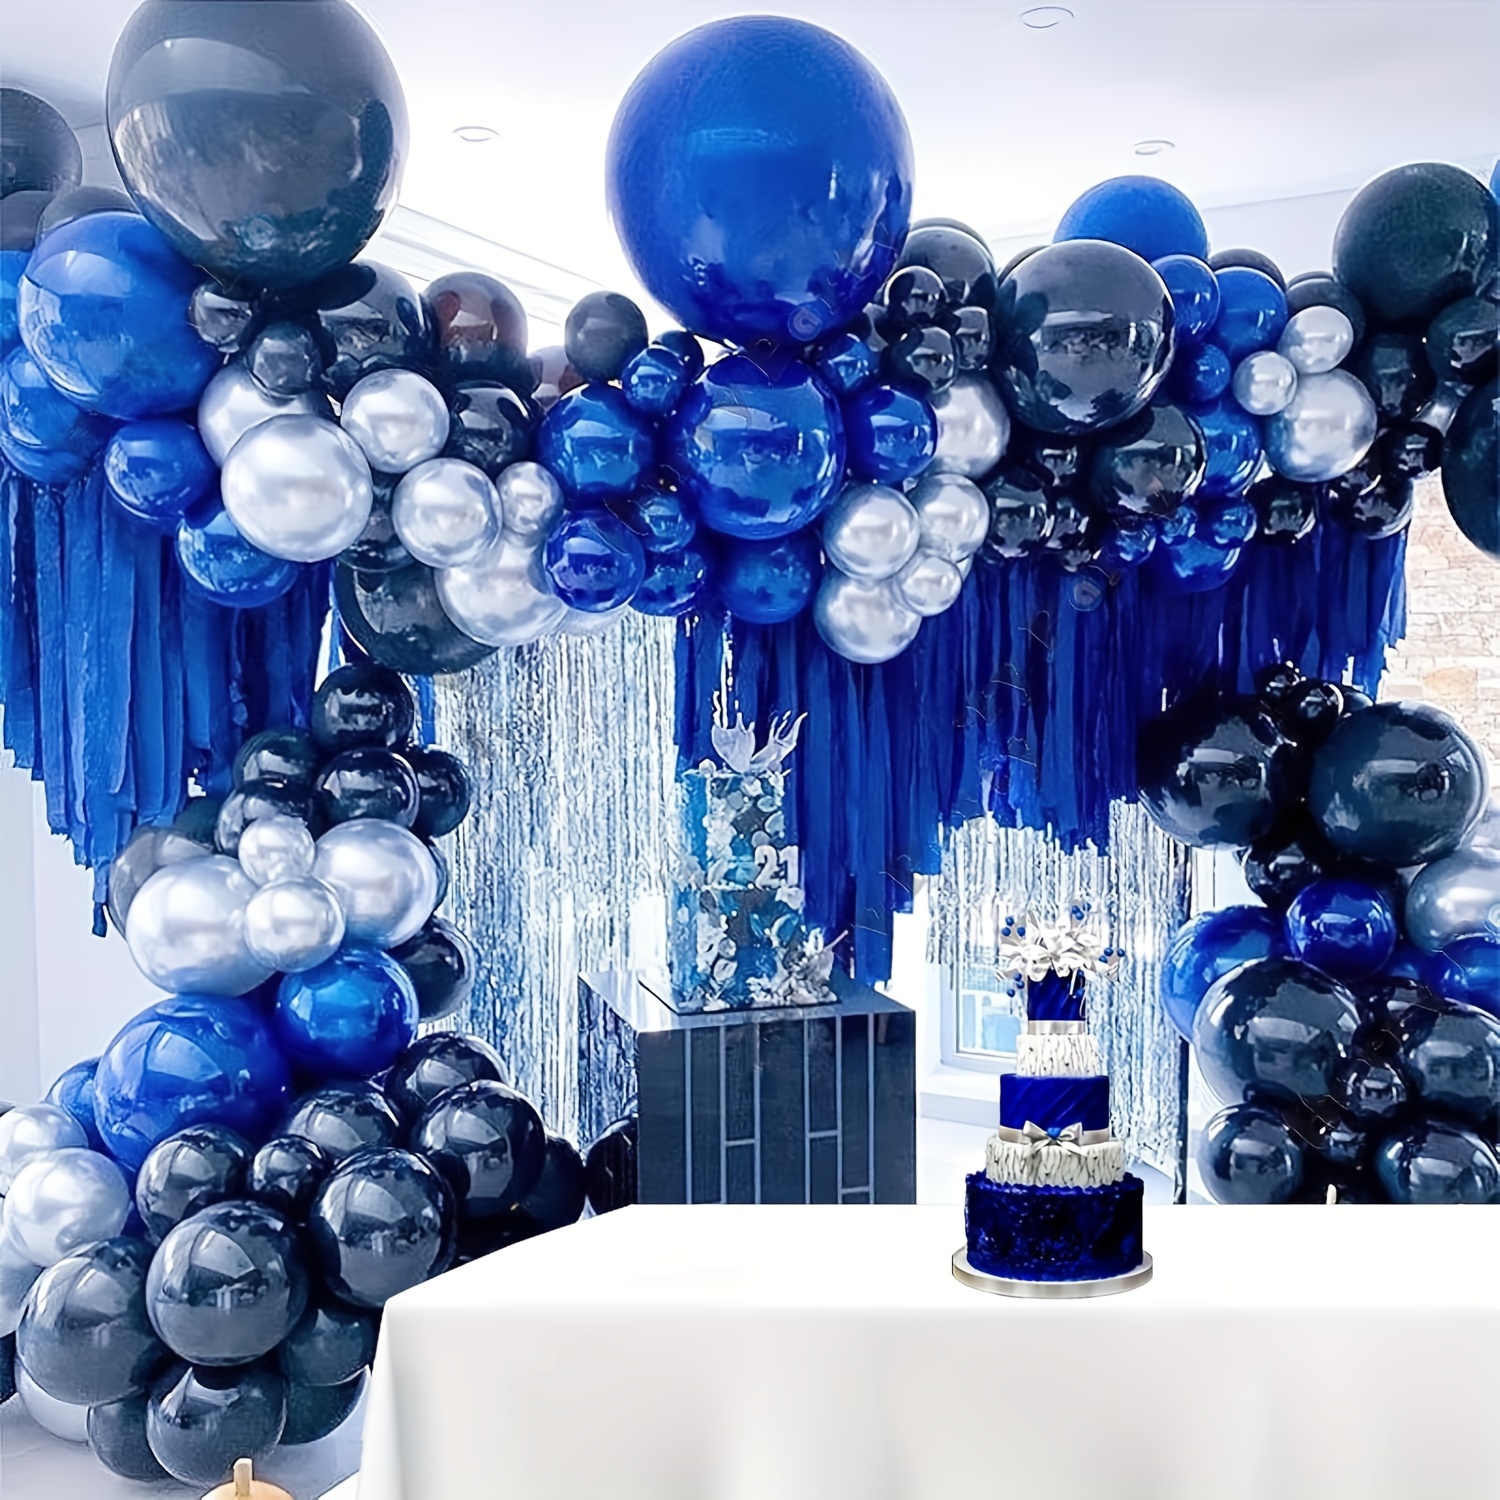 

160pcs Navy New Dark Blue Metal Silvery Balloon Set, Suitable For New Year Background Decoration, Wedding Graduation Stage Decoration, Birthday Party Decoration, Friends Party Scene Decoration